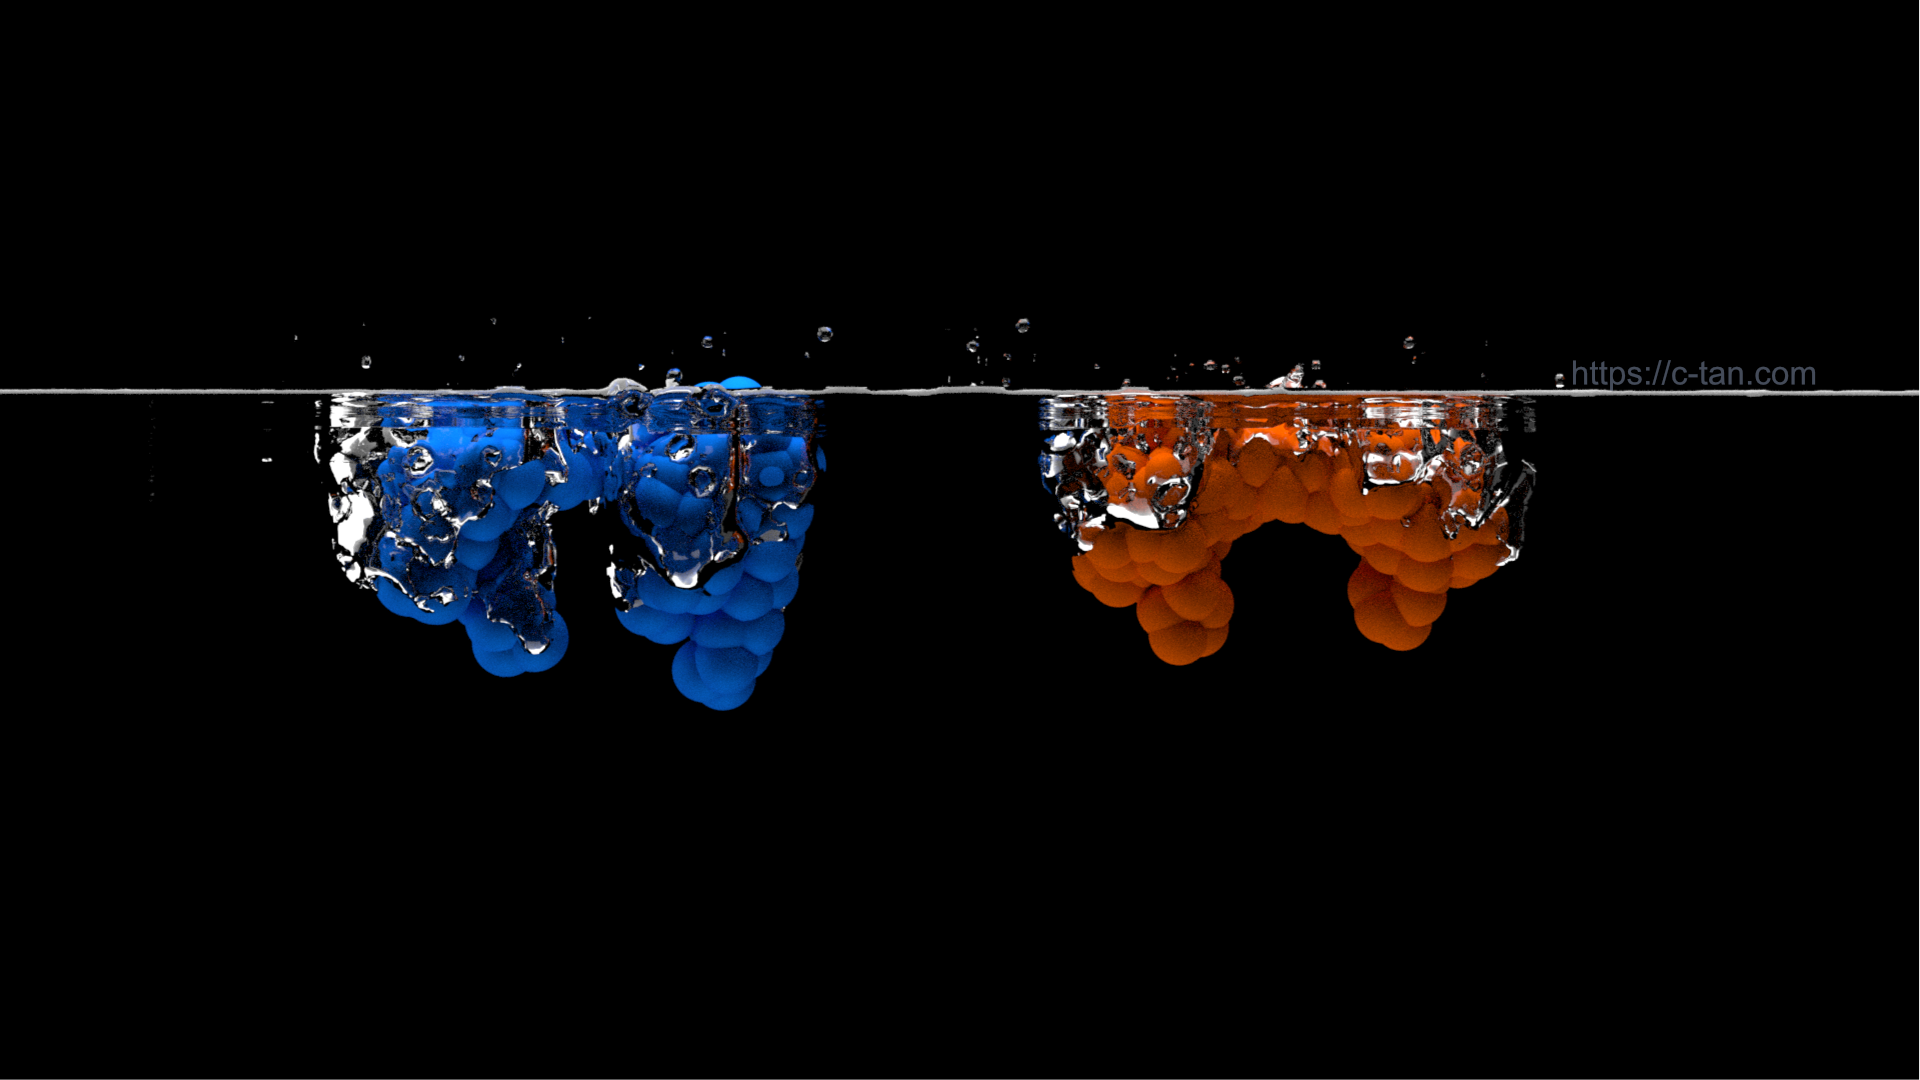 CG simulations of protein solvation.